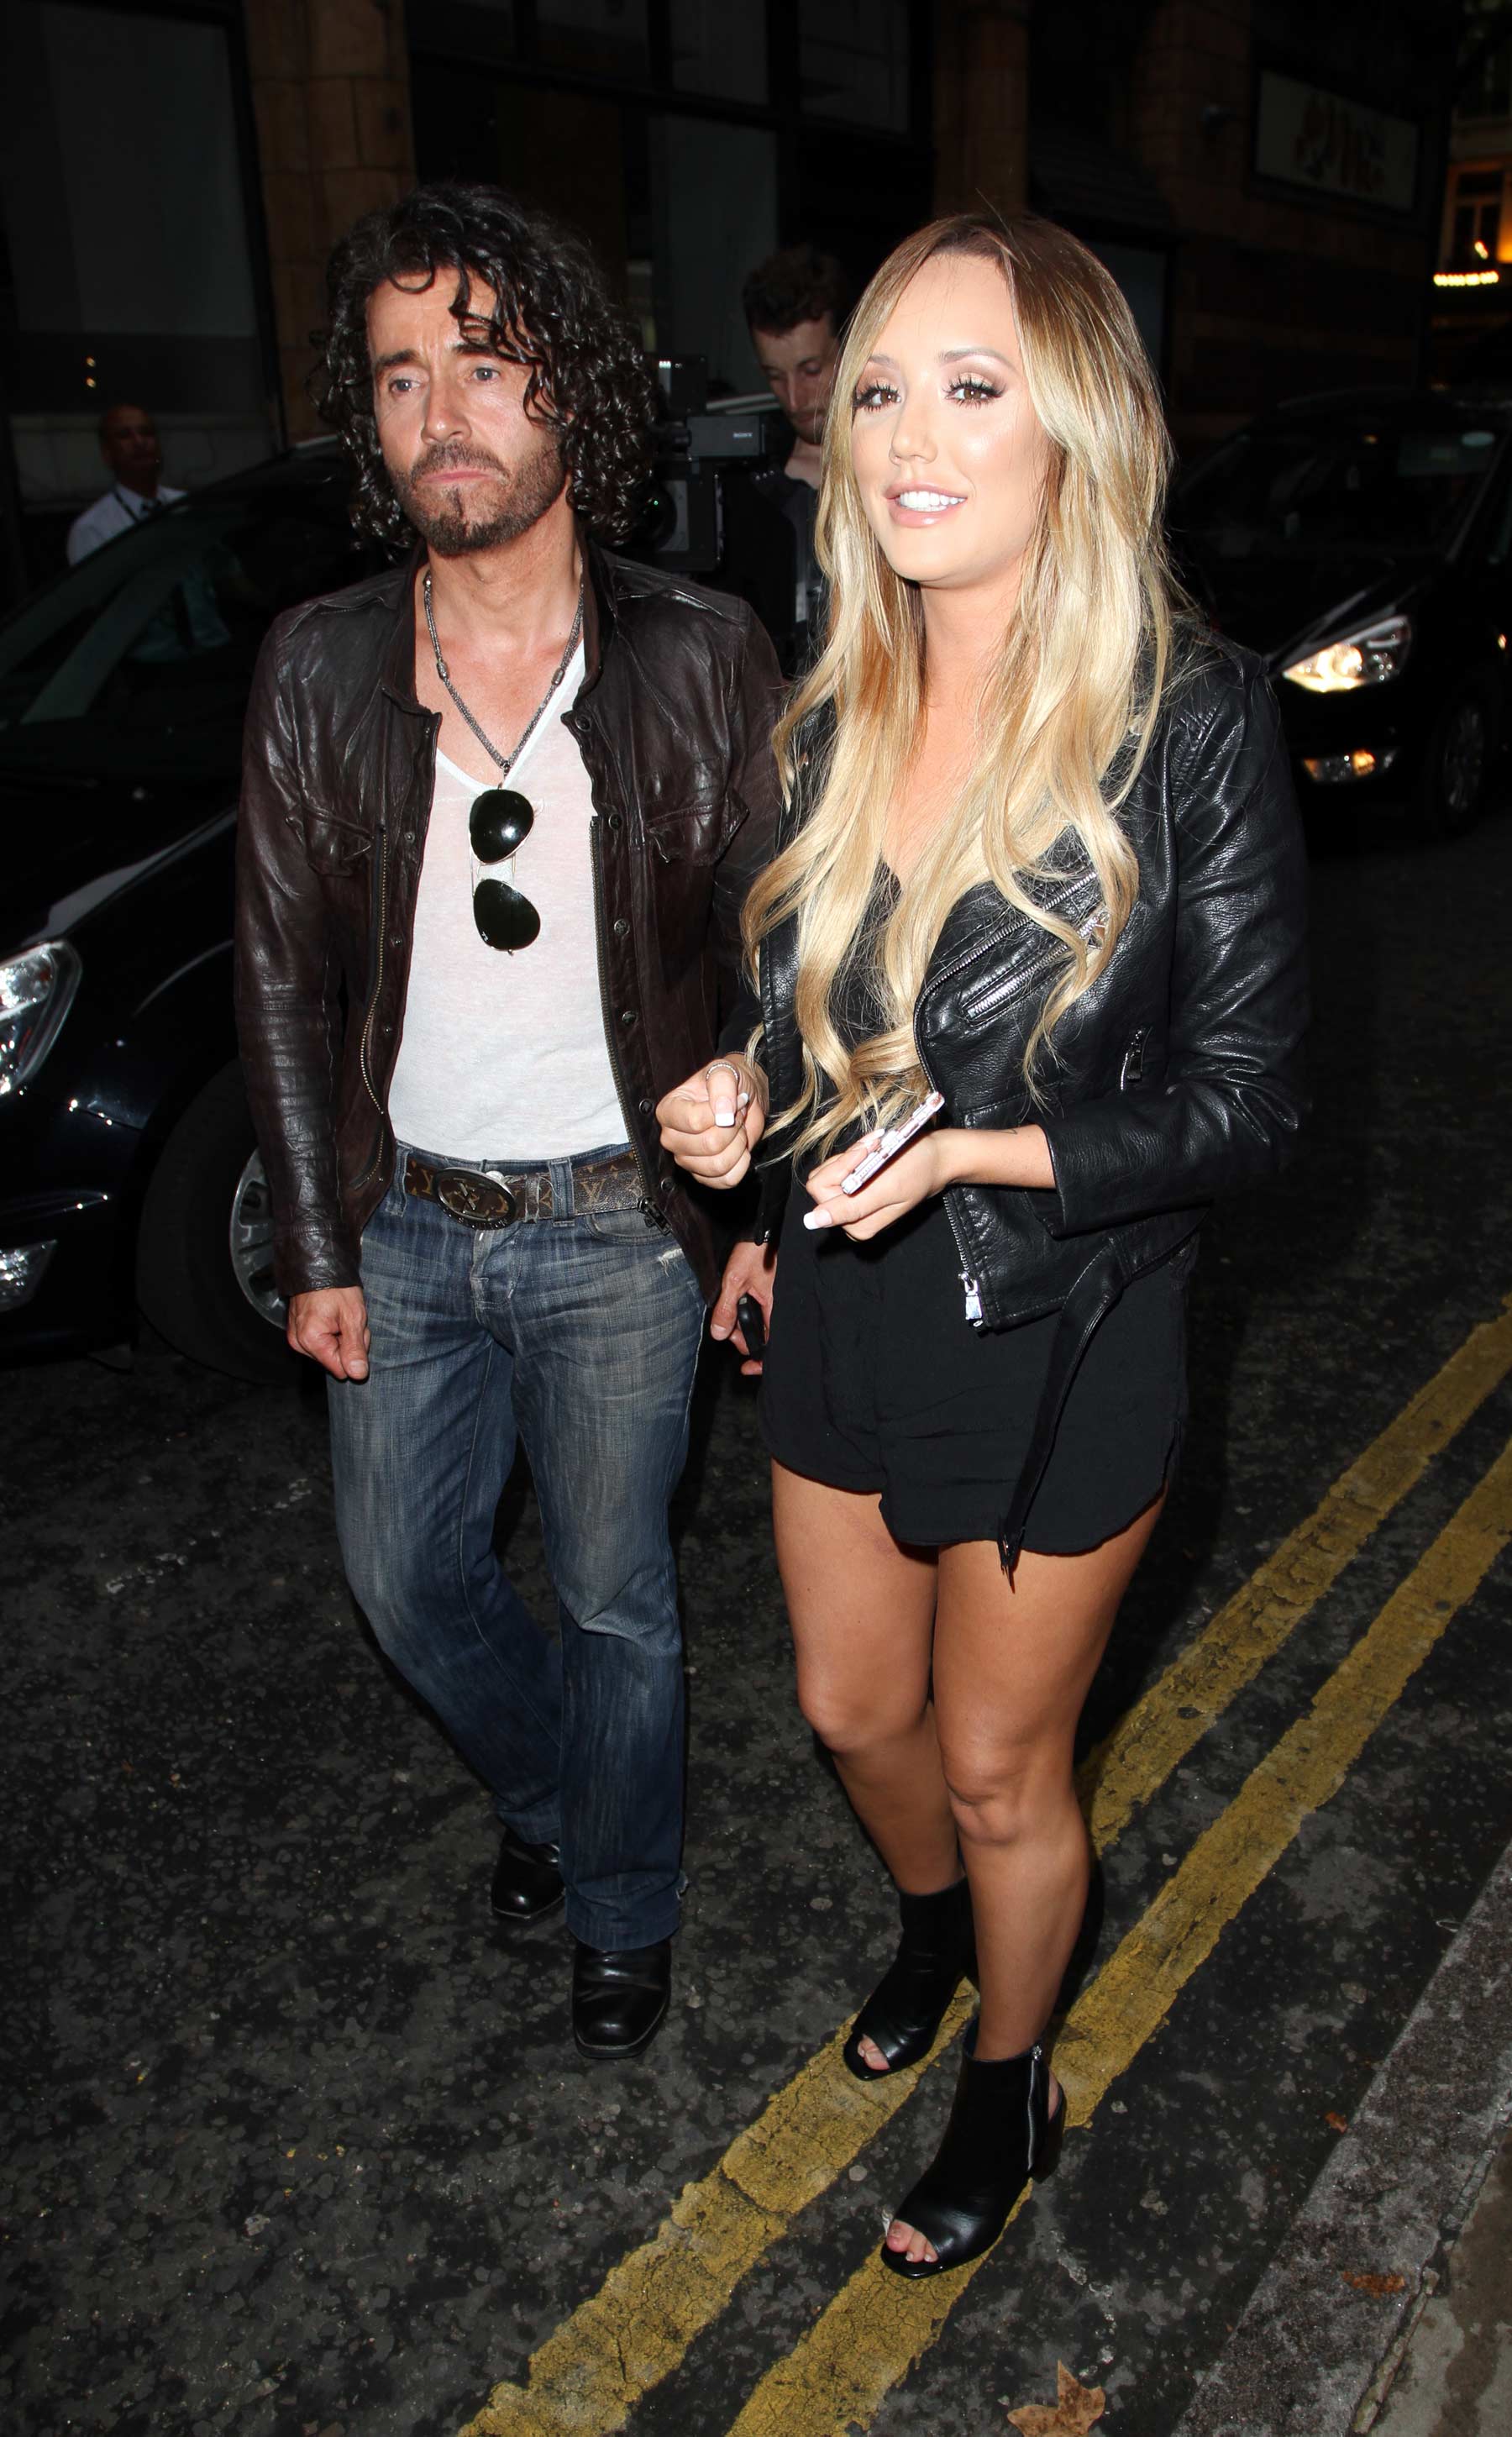 Charlotte Crosby attends Mark Hill’s Pick ‘N’ Mix Launch Party